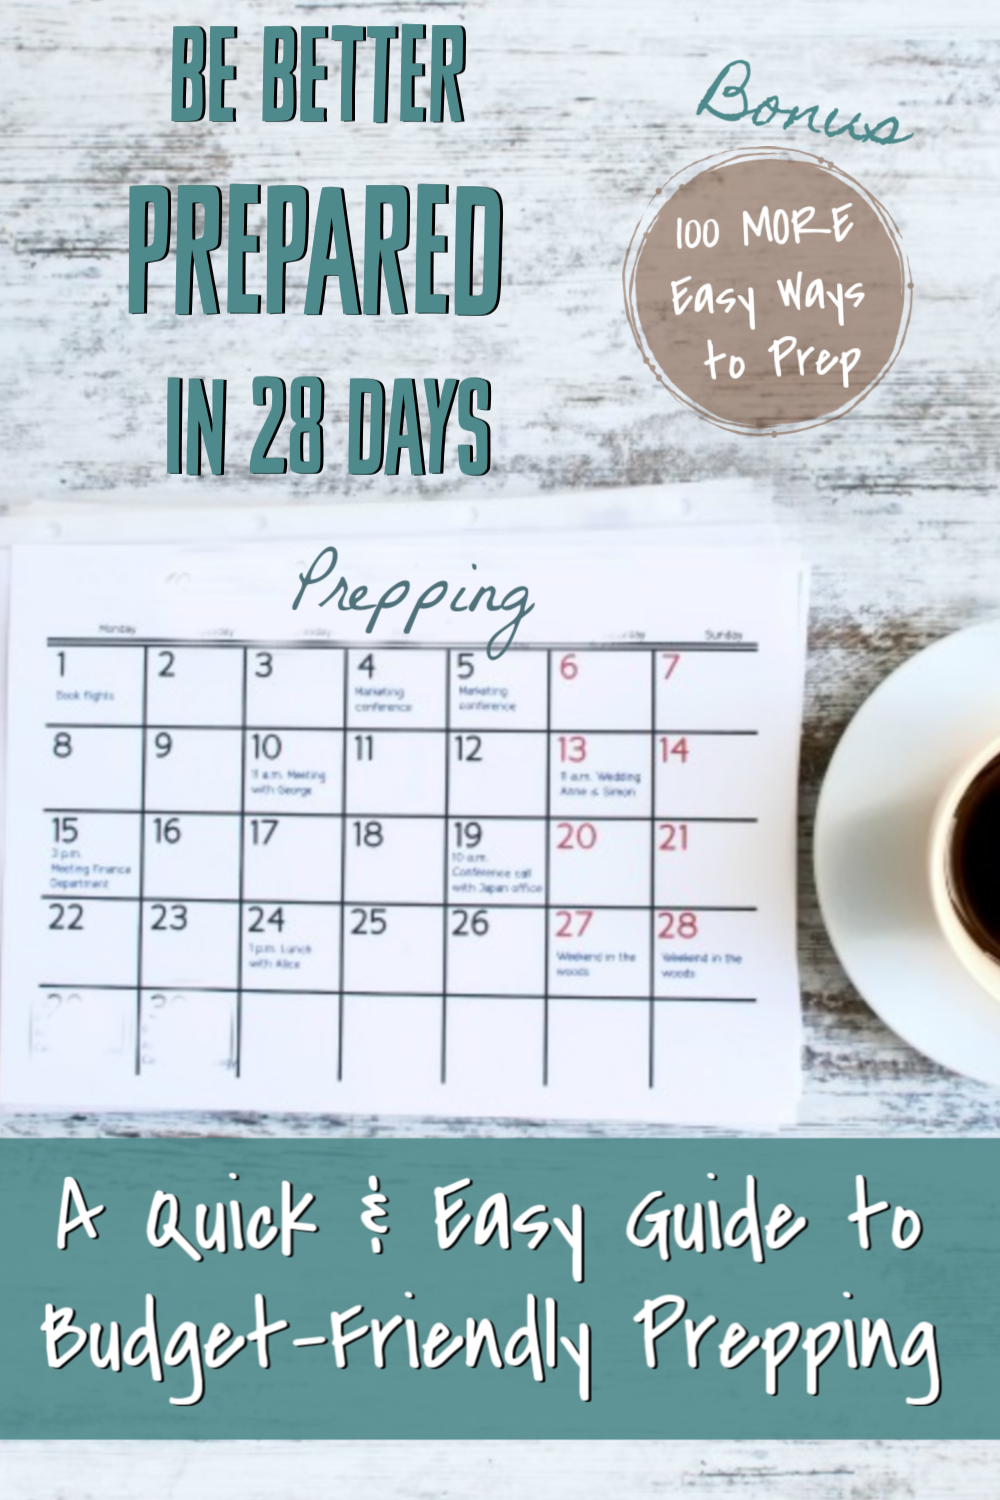 A Quick & Easy Guide To Budget-Friendly Prepping